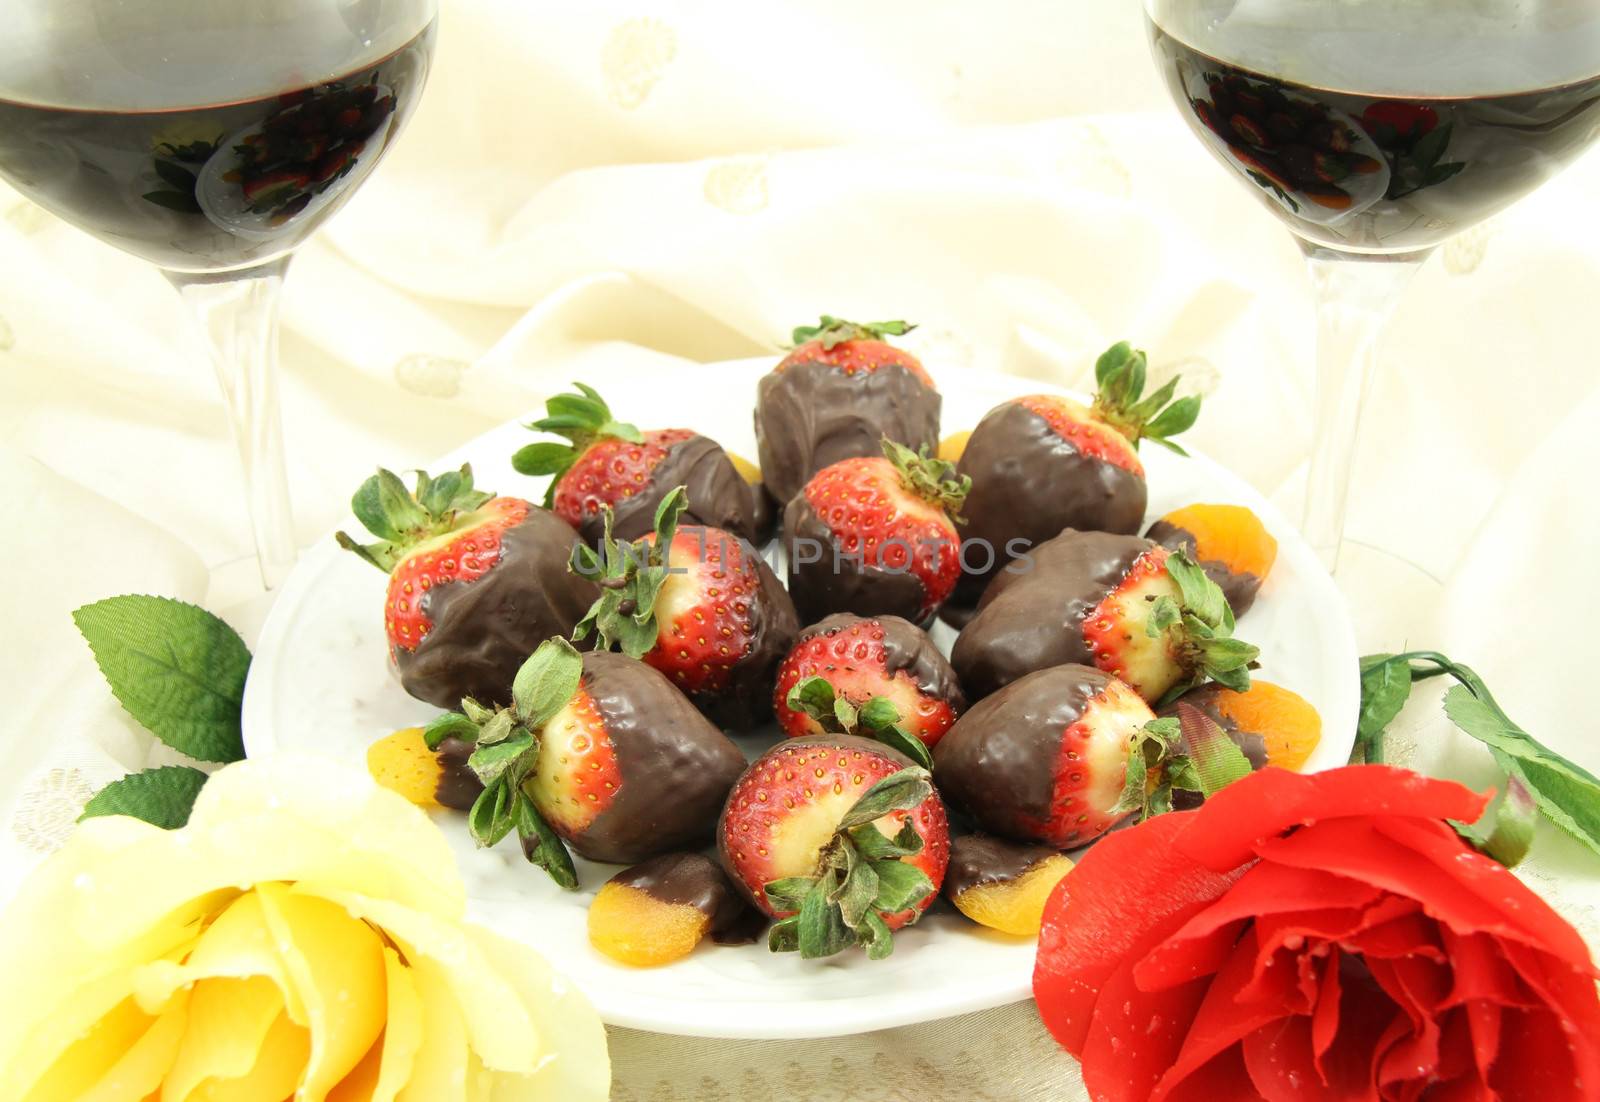 Red and white wine with chocolate covered strawberries, chocolate covered apricots and roses.